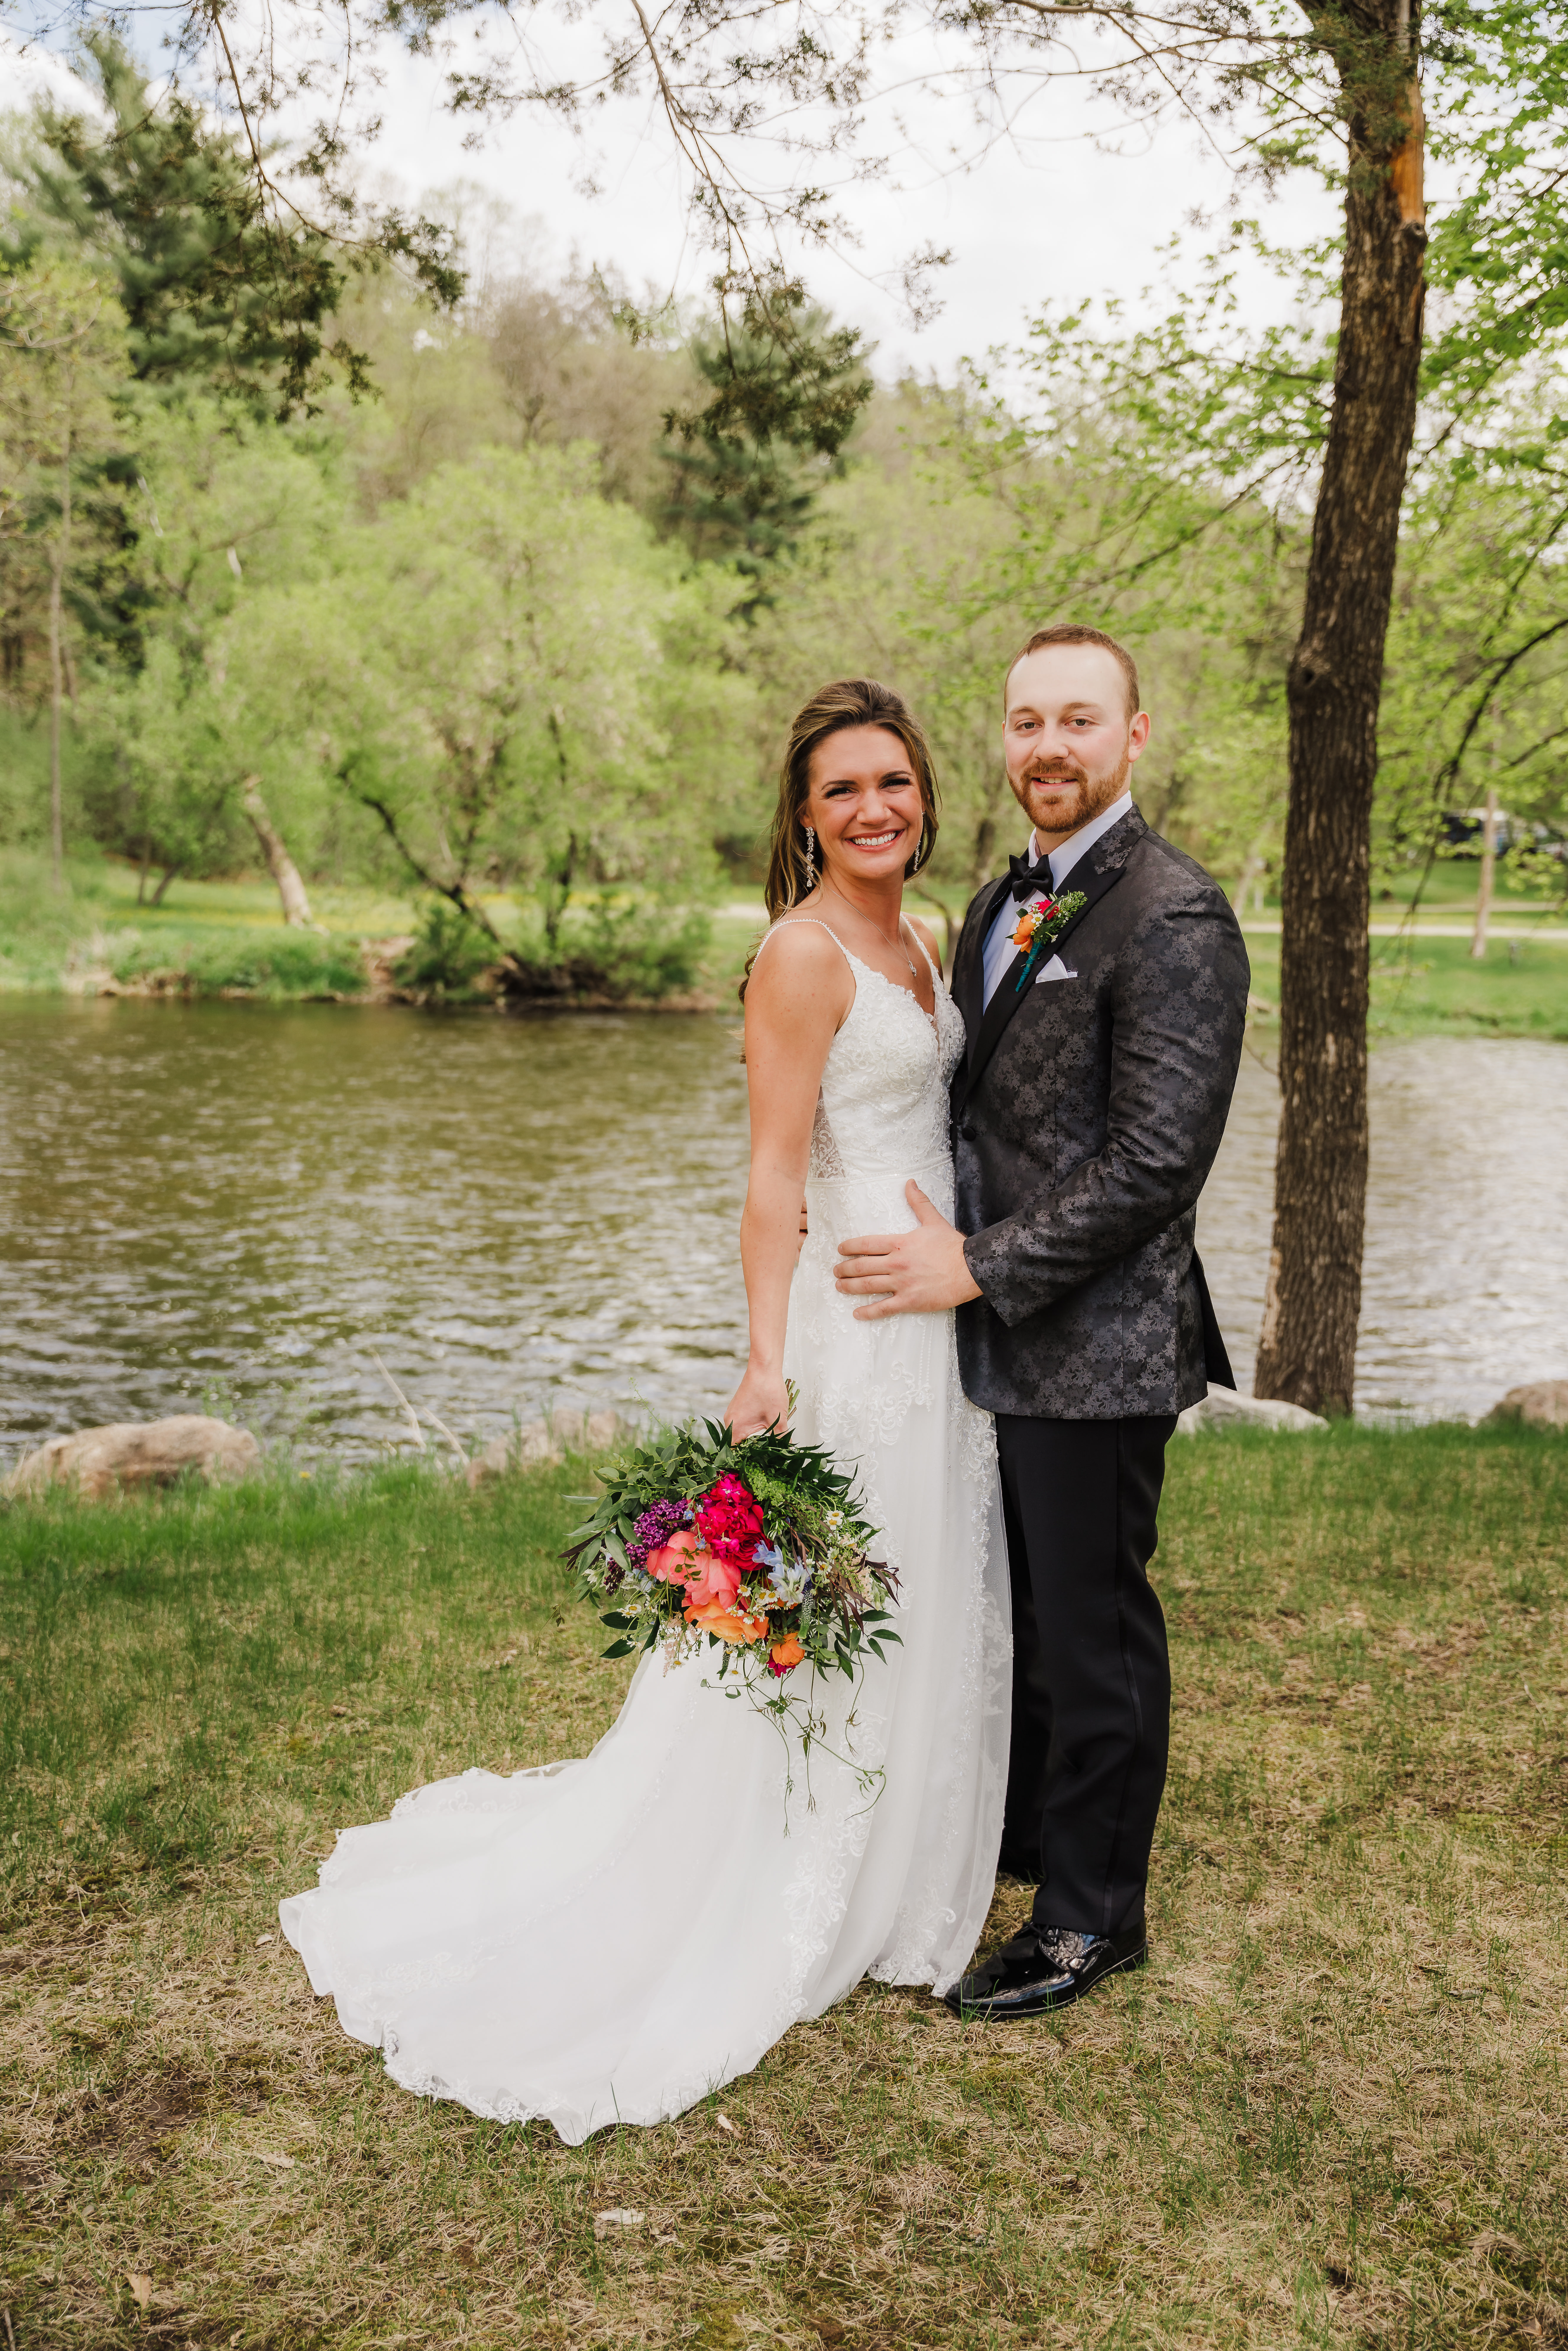 Newlywed bride and groom pose by the water with her bright pink wedding bouquet. Wisconsin summer wedding Pink wedding scheme Bridal poses #forestgreenwedding #rusticweddingvenue #weddingplanning #wisconsinweddingphotographer #wisconsinweddingvenue